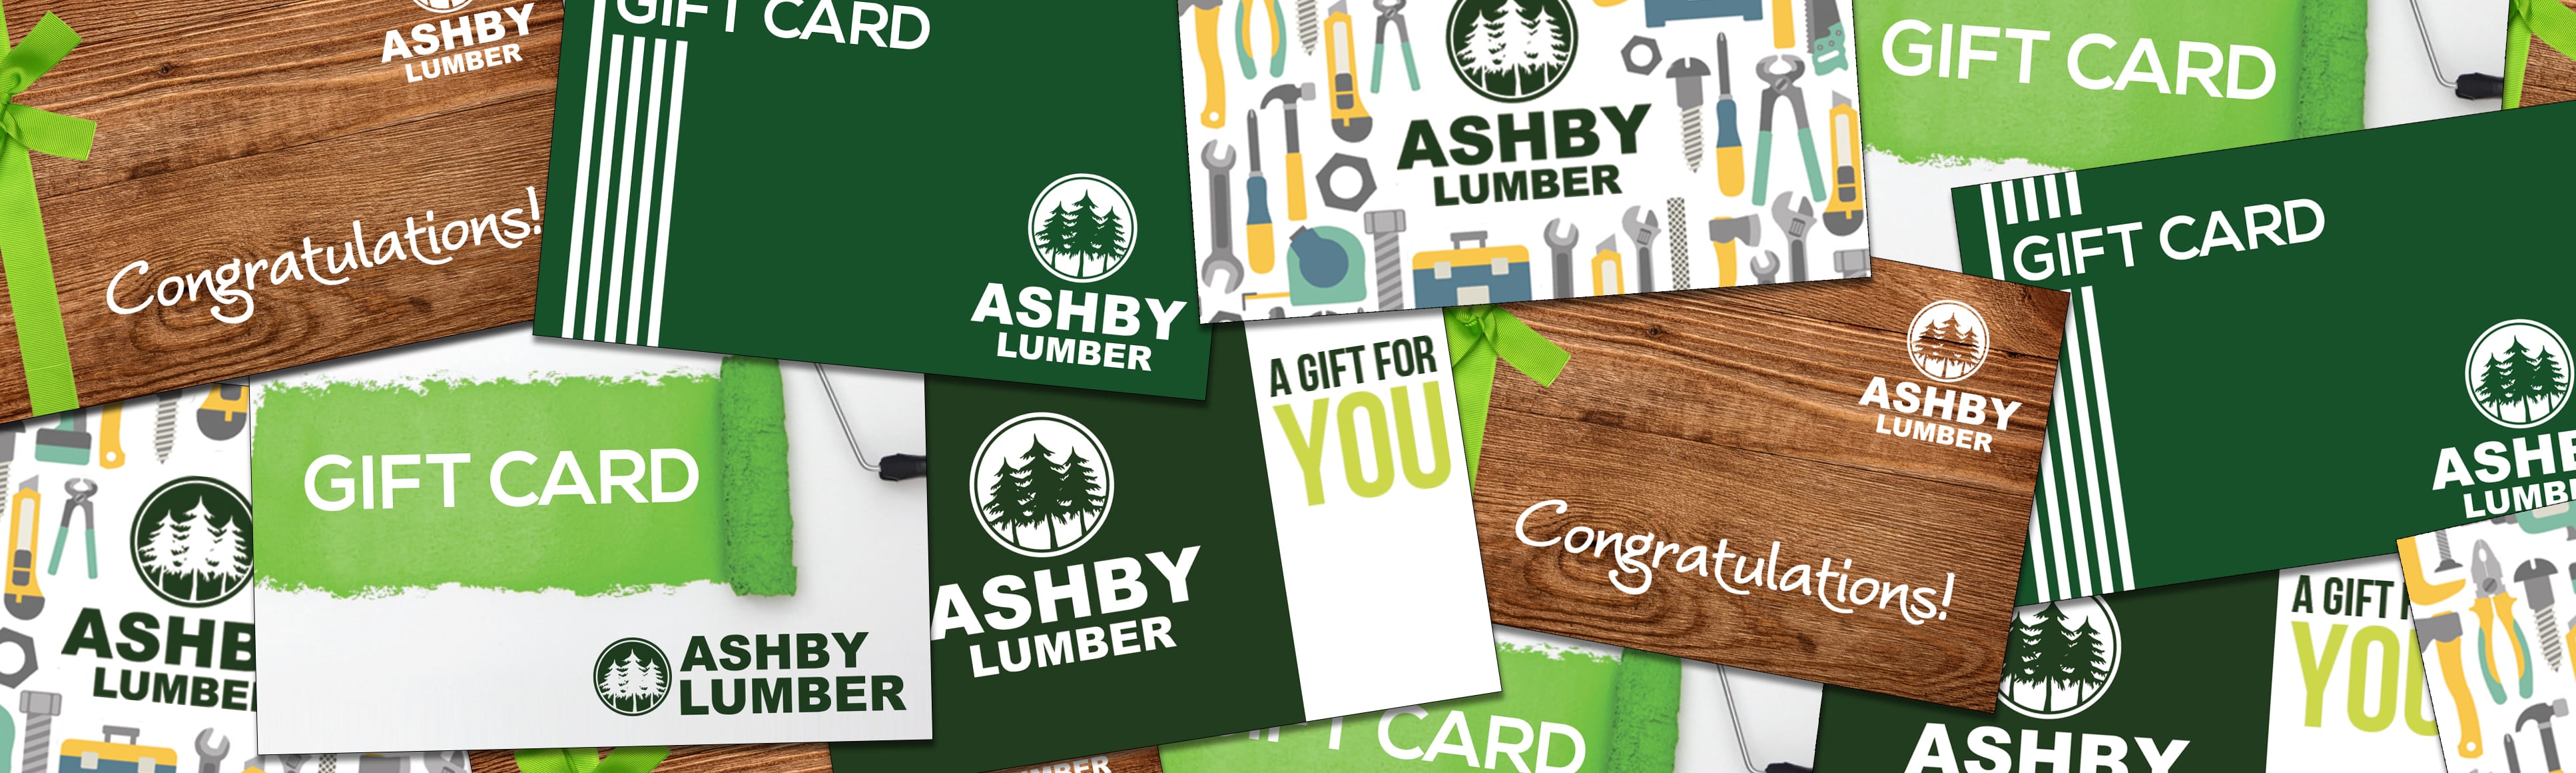 Ashby Lumber Gift Cards Concord East Bay Berkeley Oakland Ca Window Replacement Company